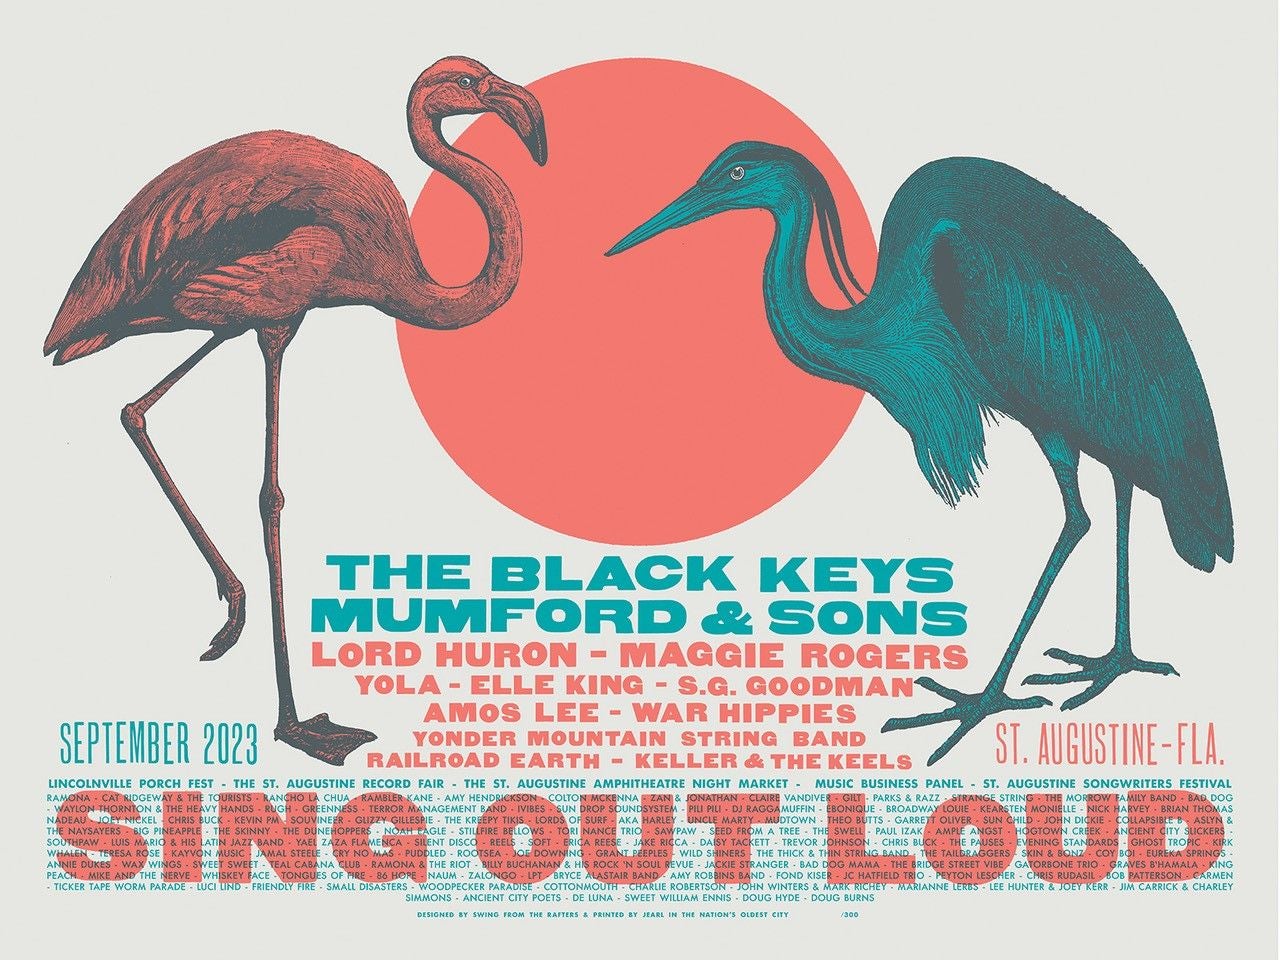 The Black Keys are coming home and ready to rock